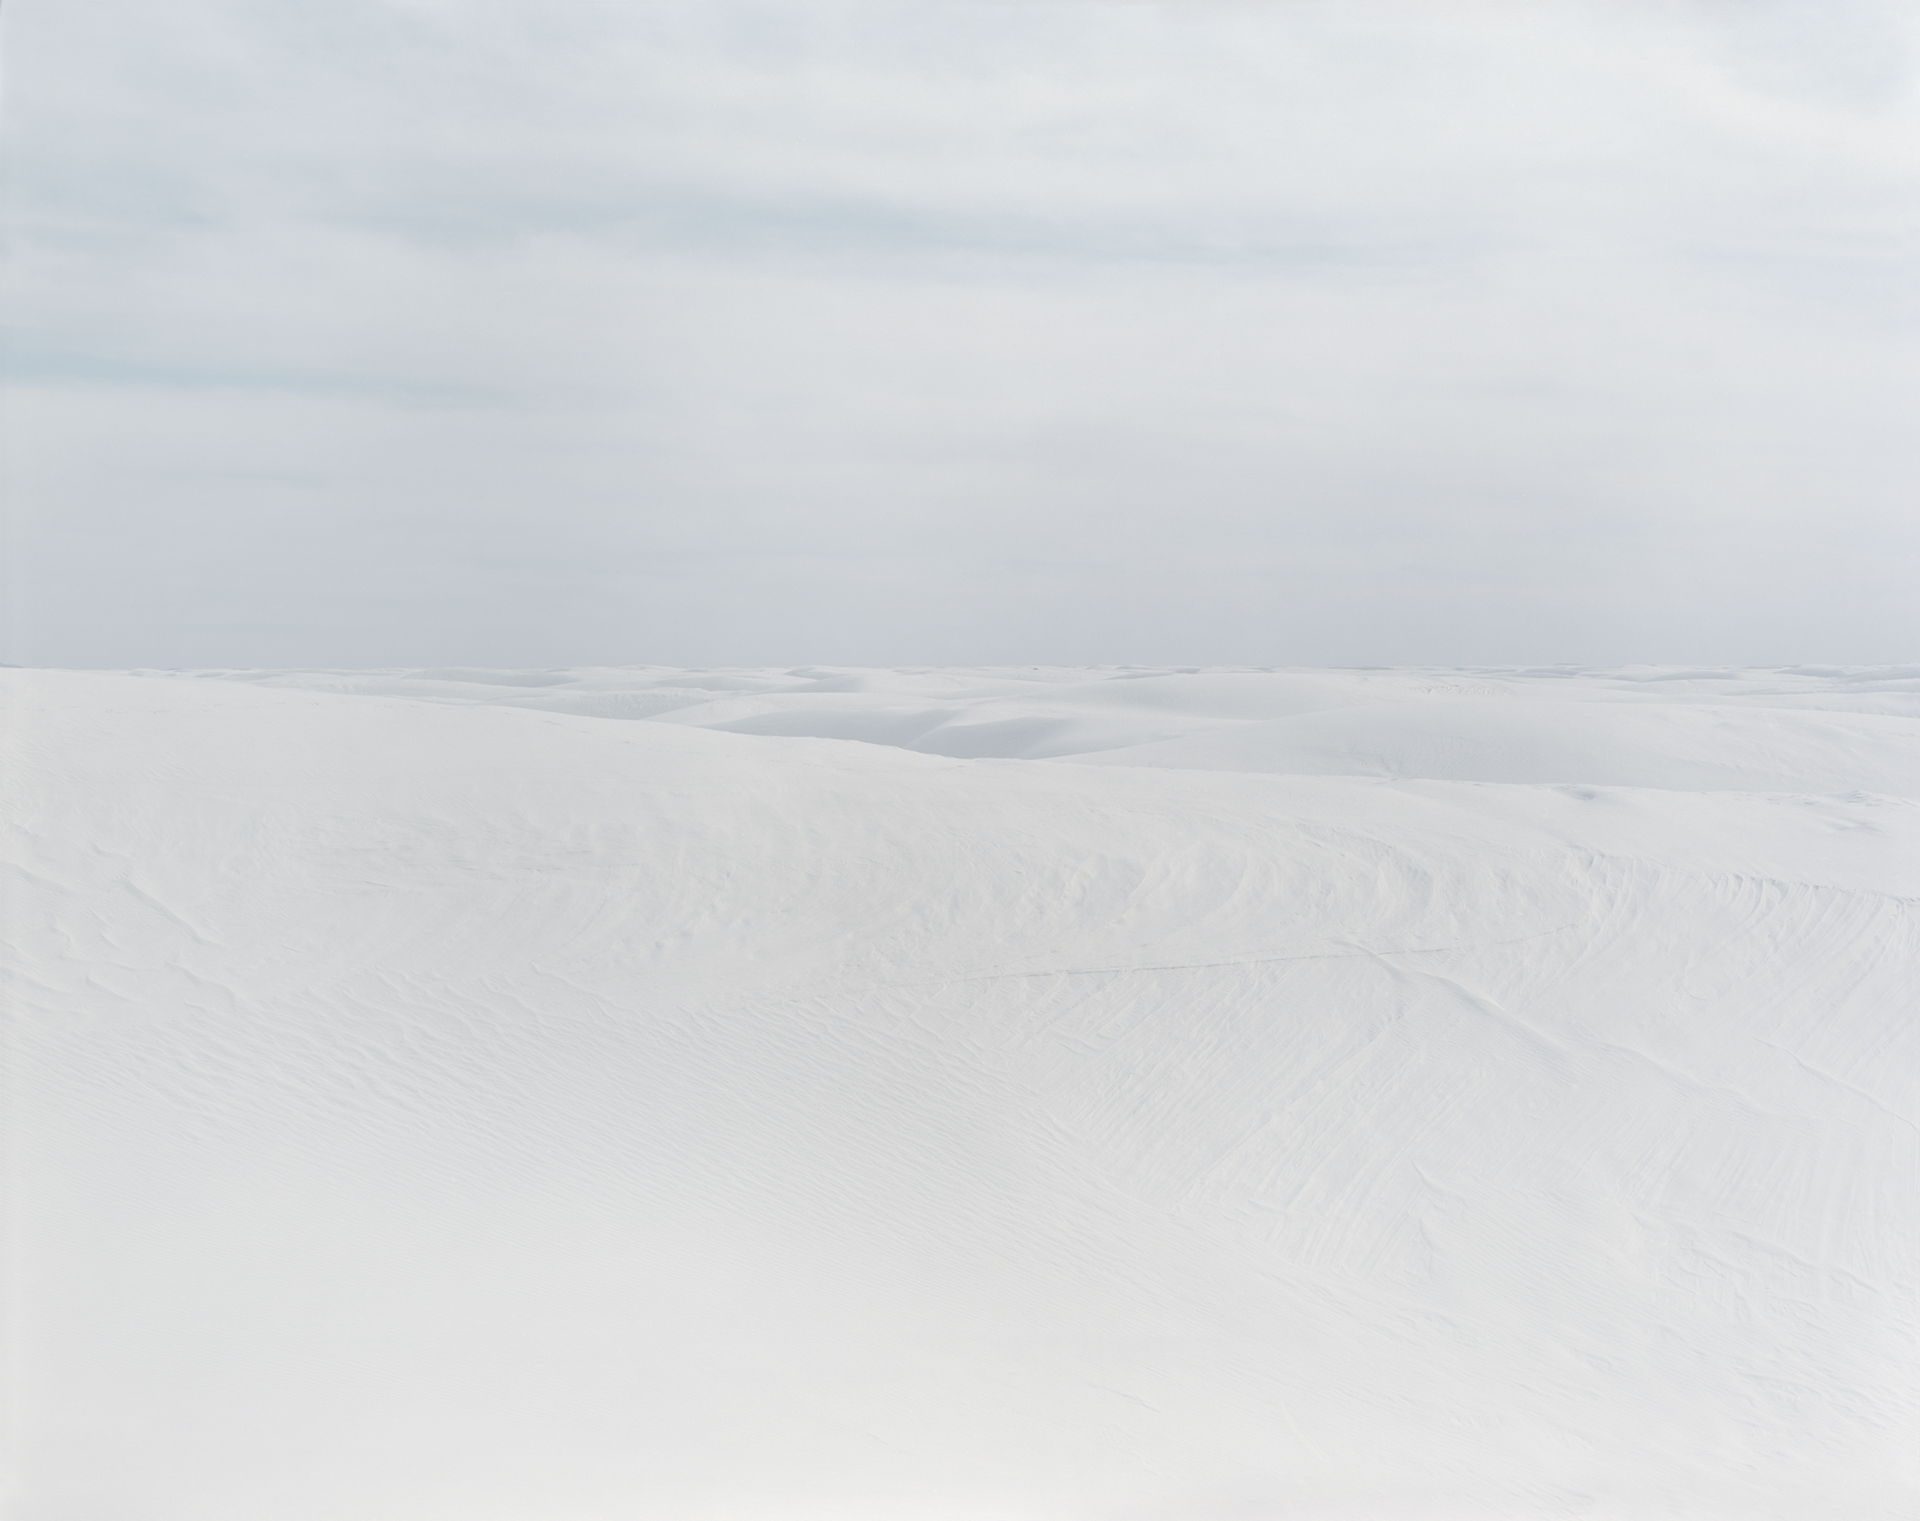 Dunes at White Sands, New Mexico by Laura McPhee